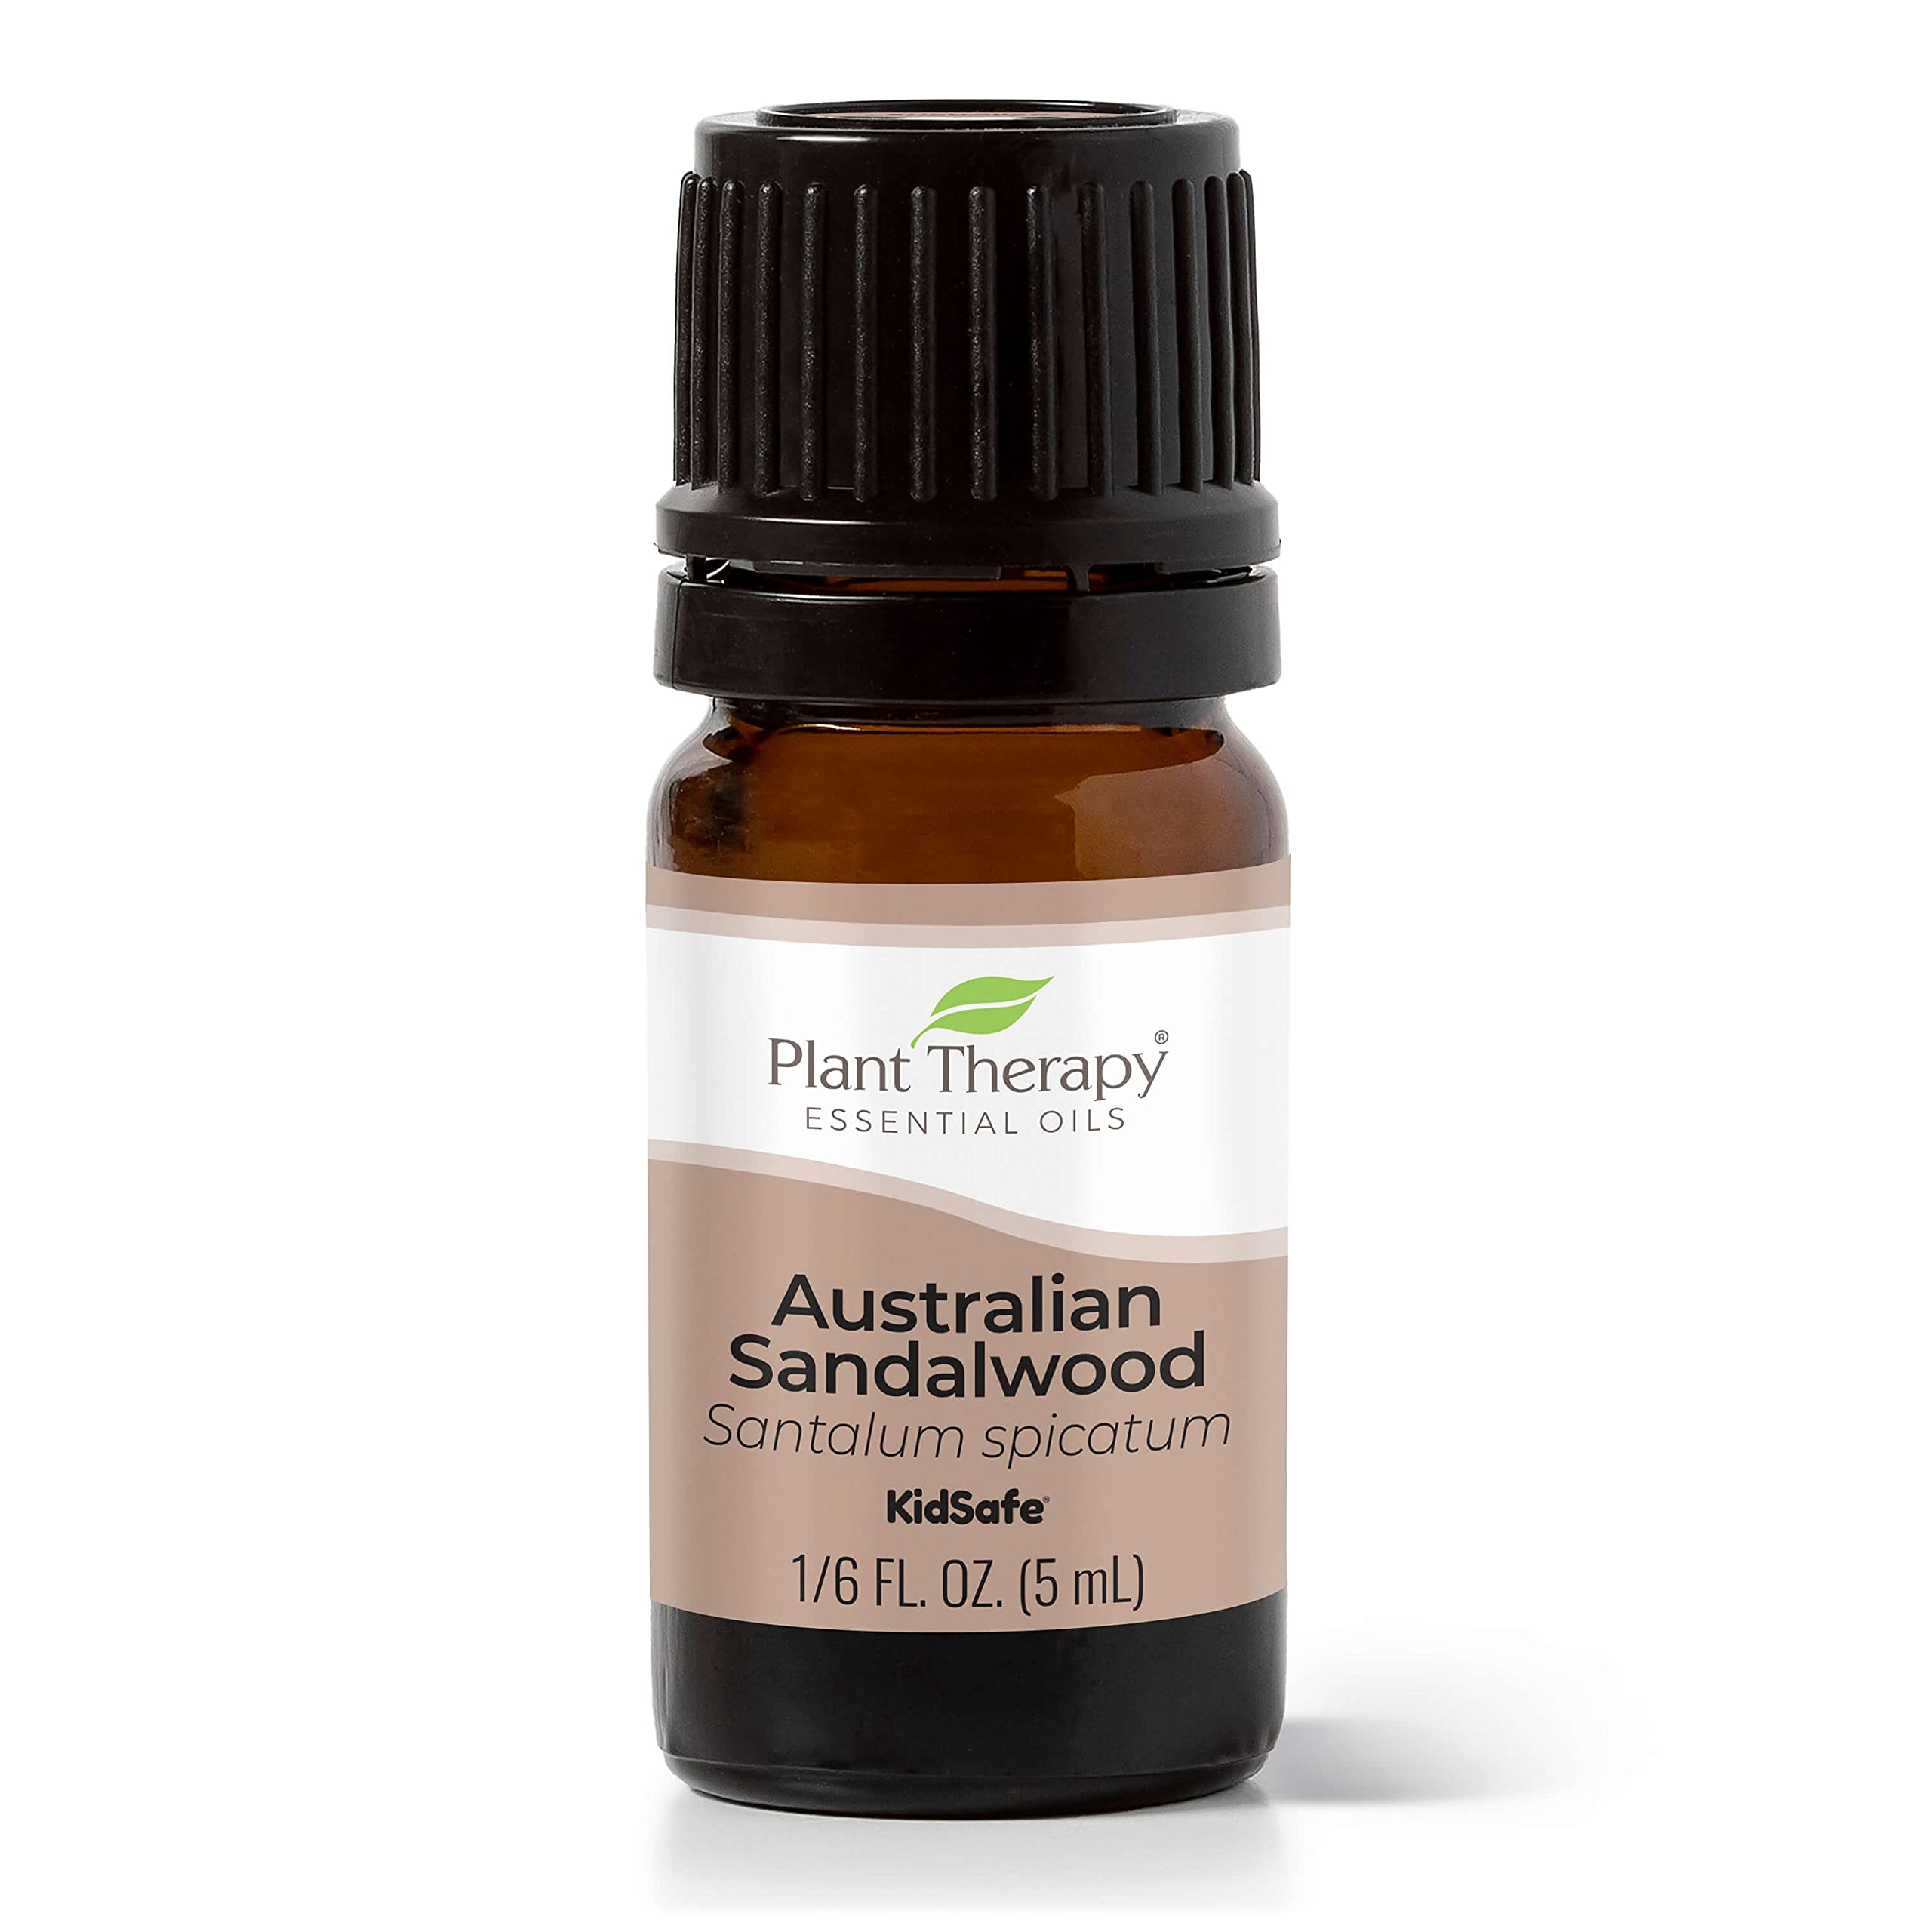 Plant Therapy Australian Sandalwood Essential Oil 100% Pure, Undiluted, Natural Aromatherapy, Therapeutic Grade 5 mL (1/6 oz)